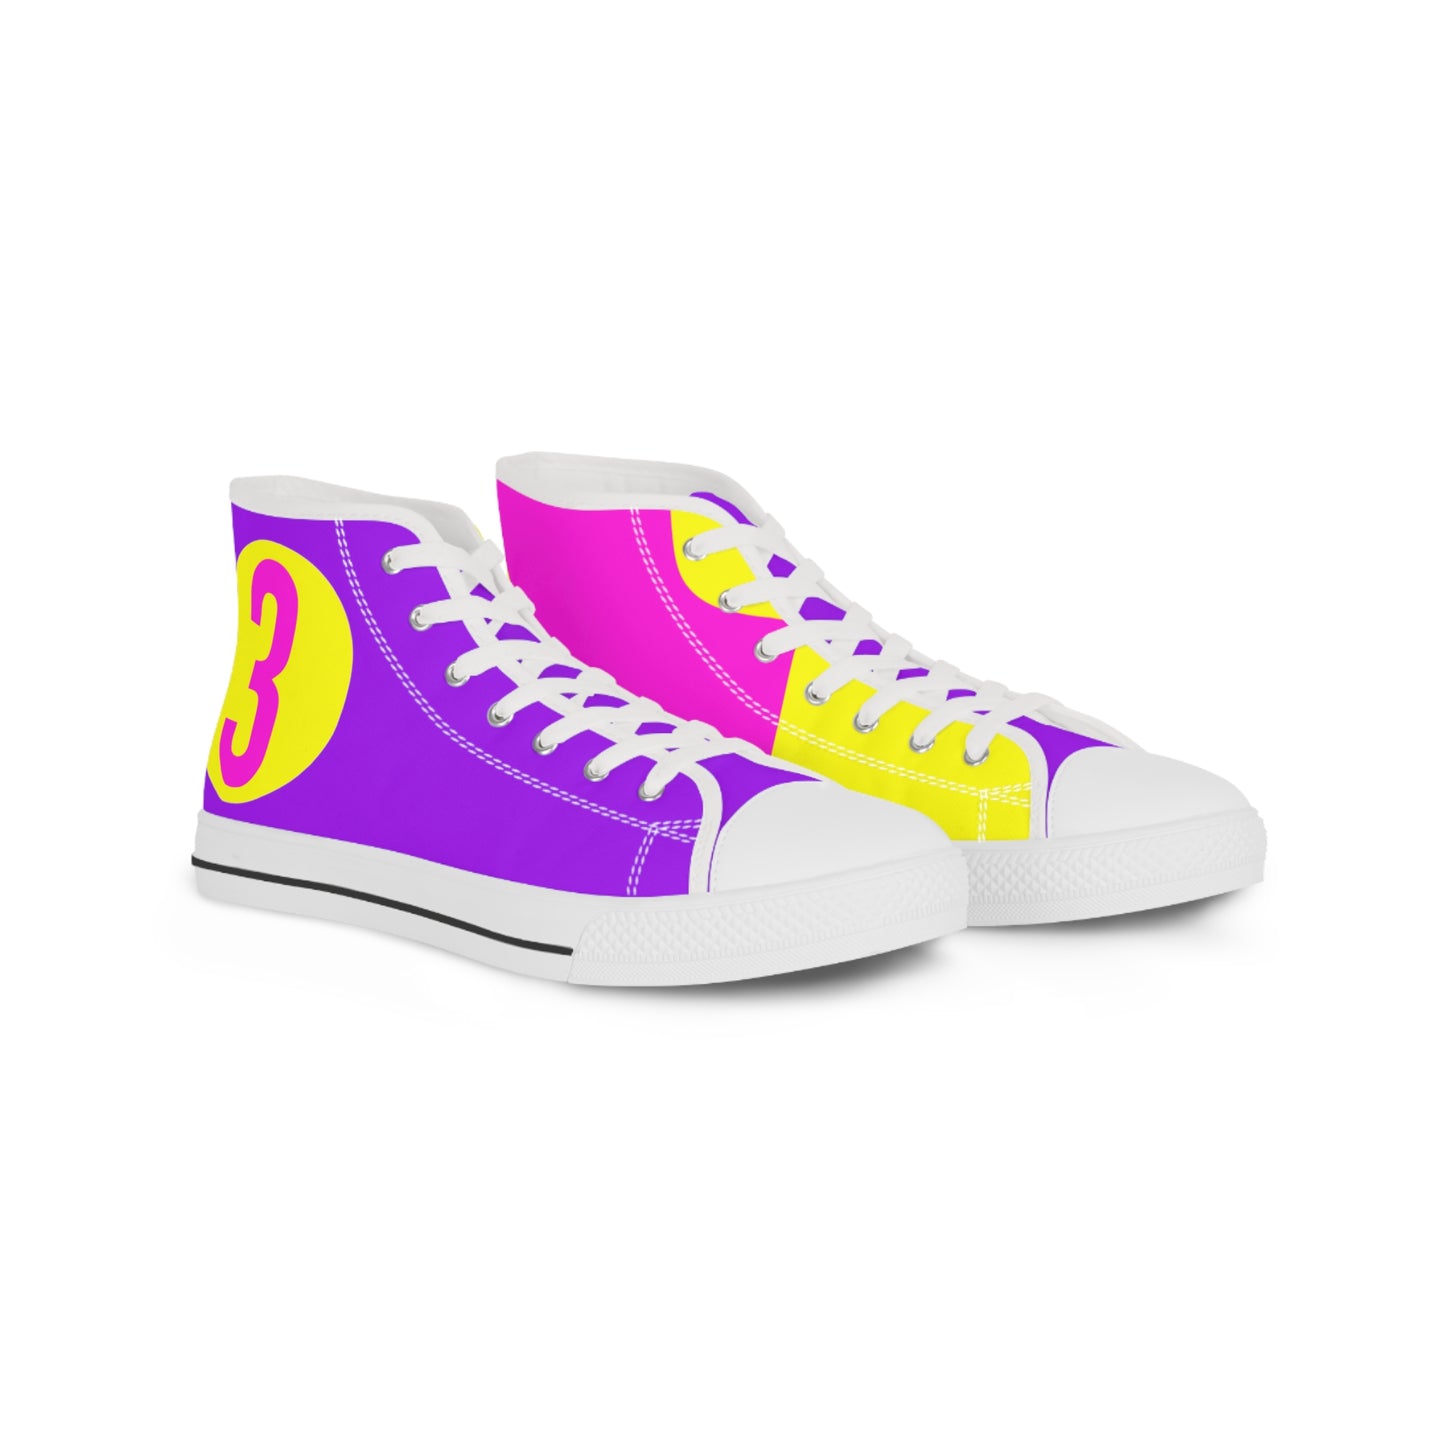 Limited Edition High Top Sneakers - 3